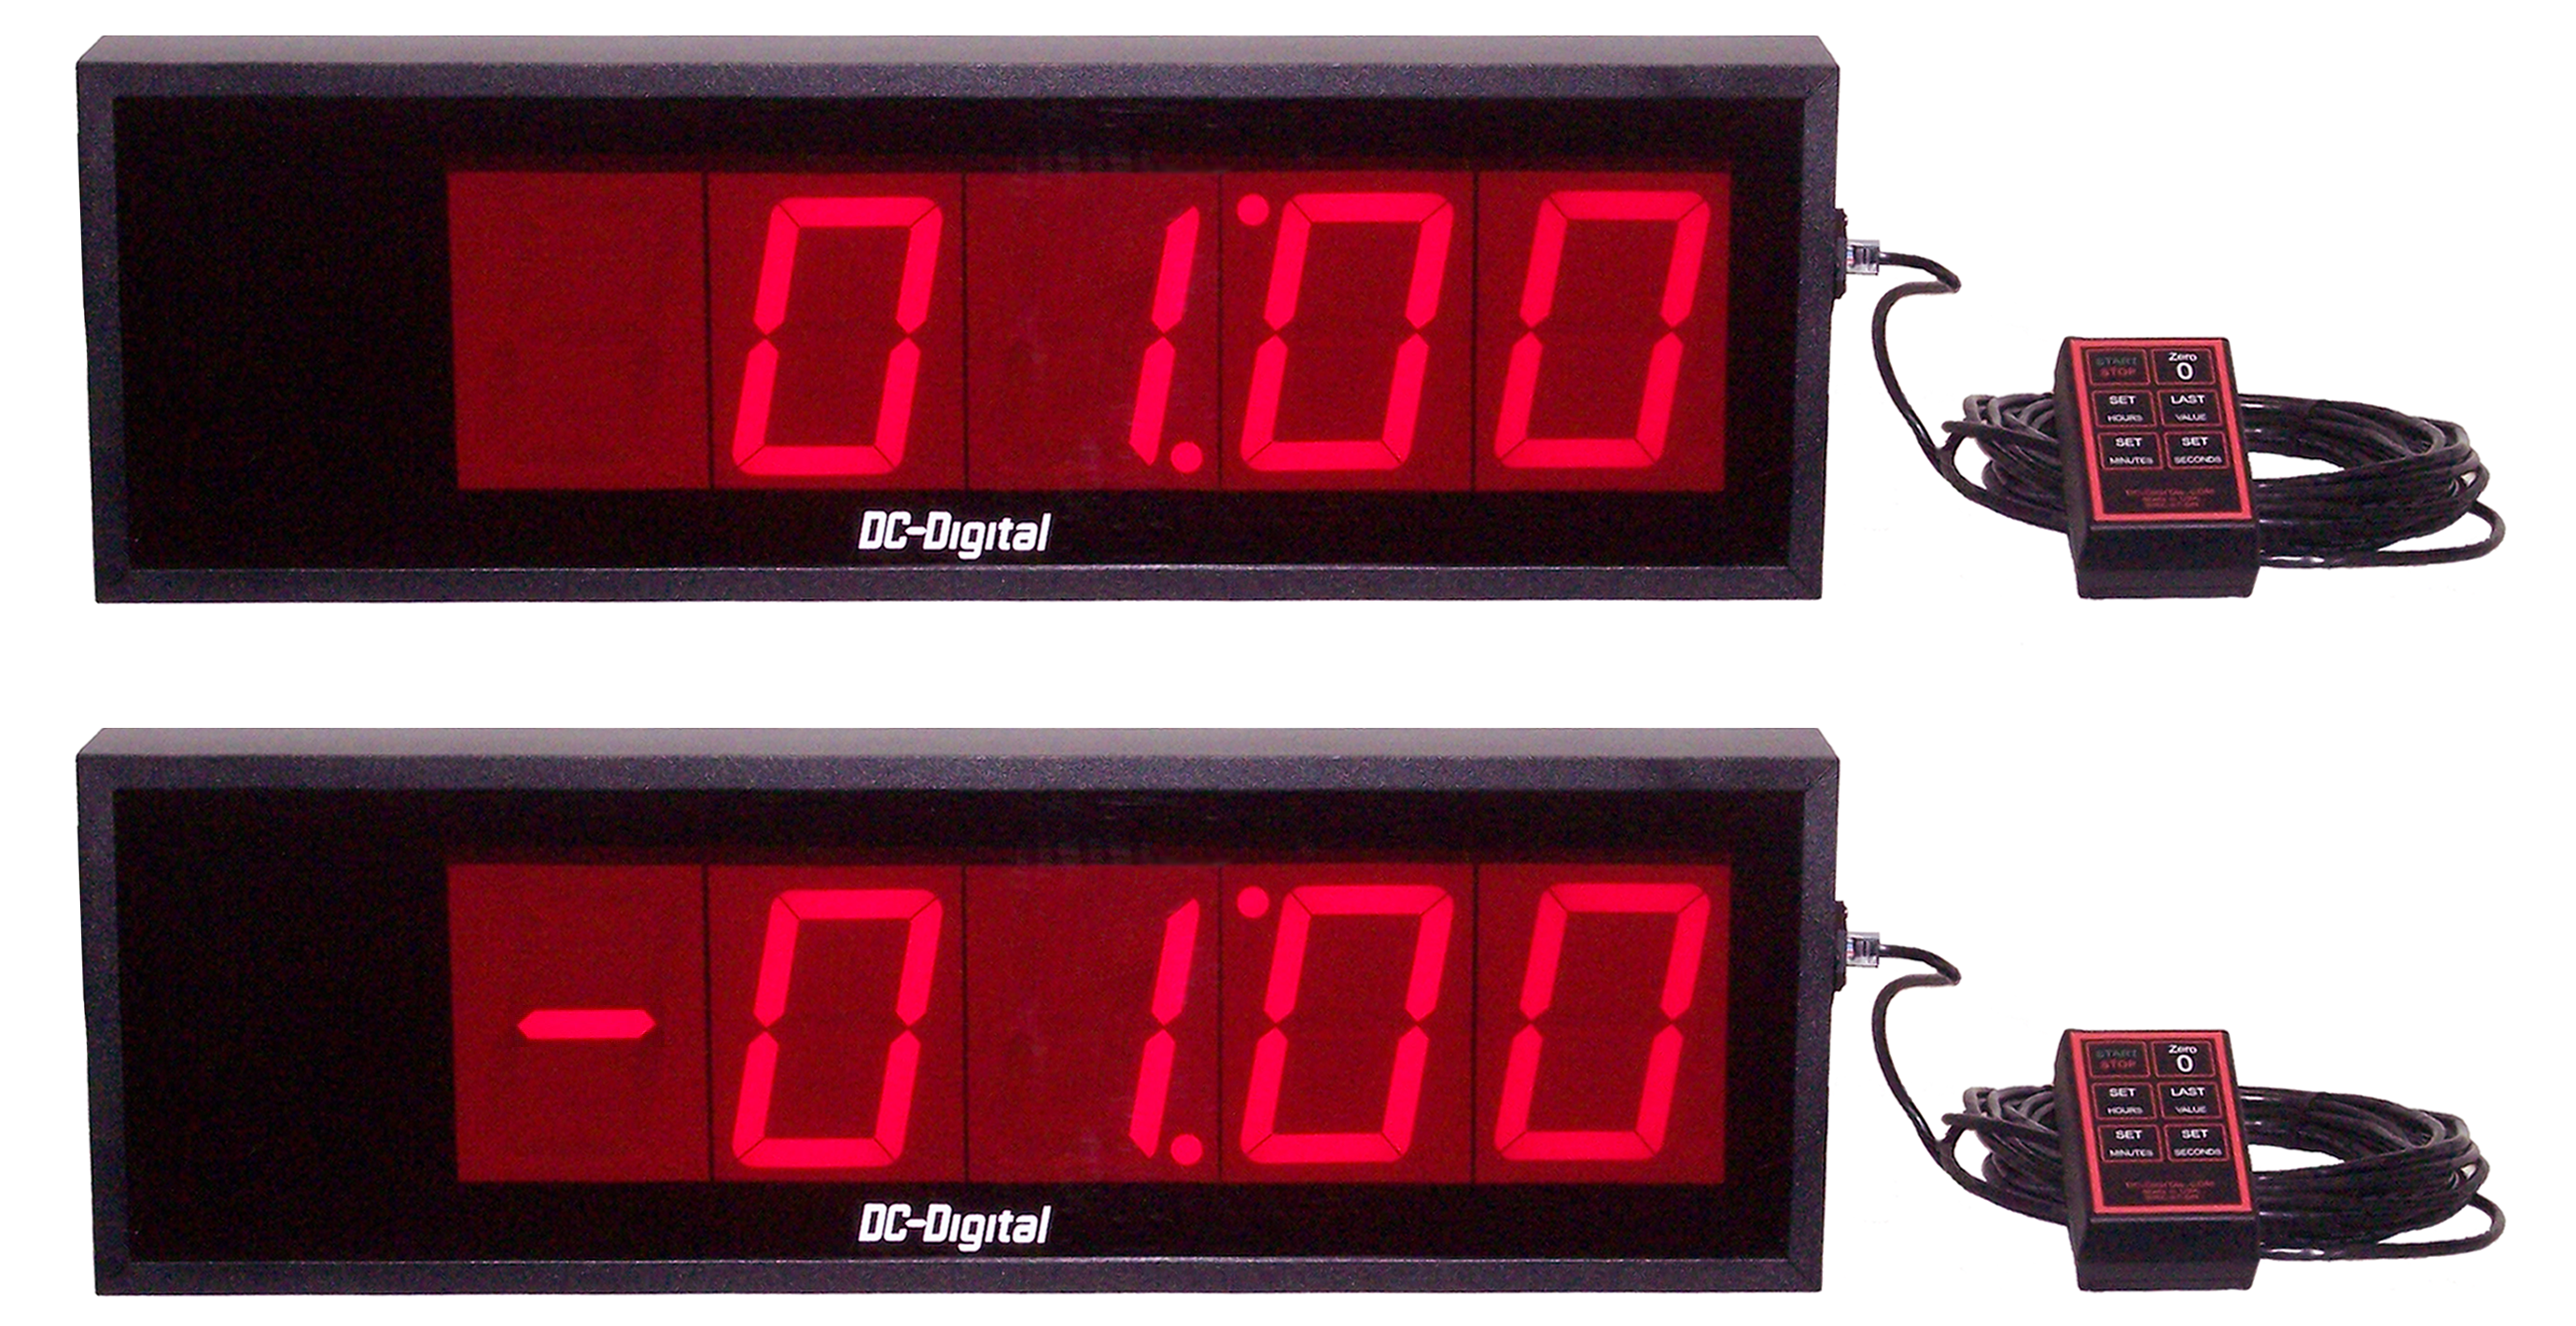 DC-405T-DN-WR Countdown Count up timer that flashes and displays a neg sign